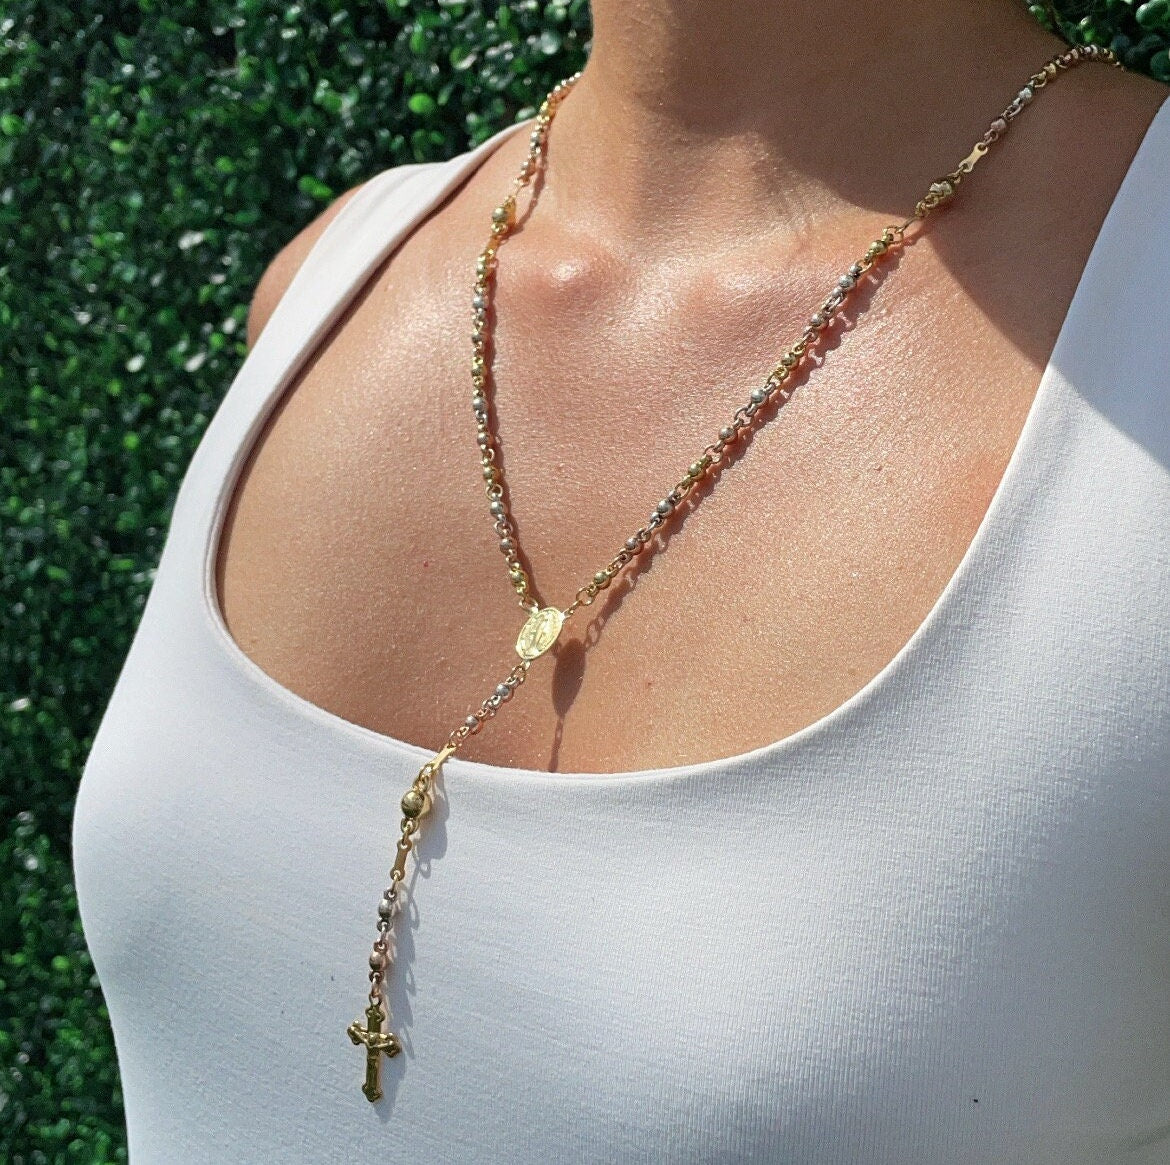 Trendy 18k Gold Layered Tri Color Bead Rosary Necklace Featuring Our Lady of